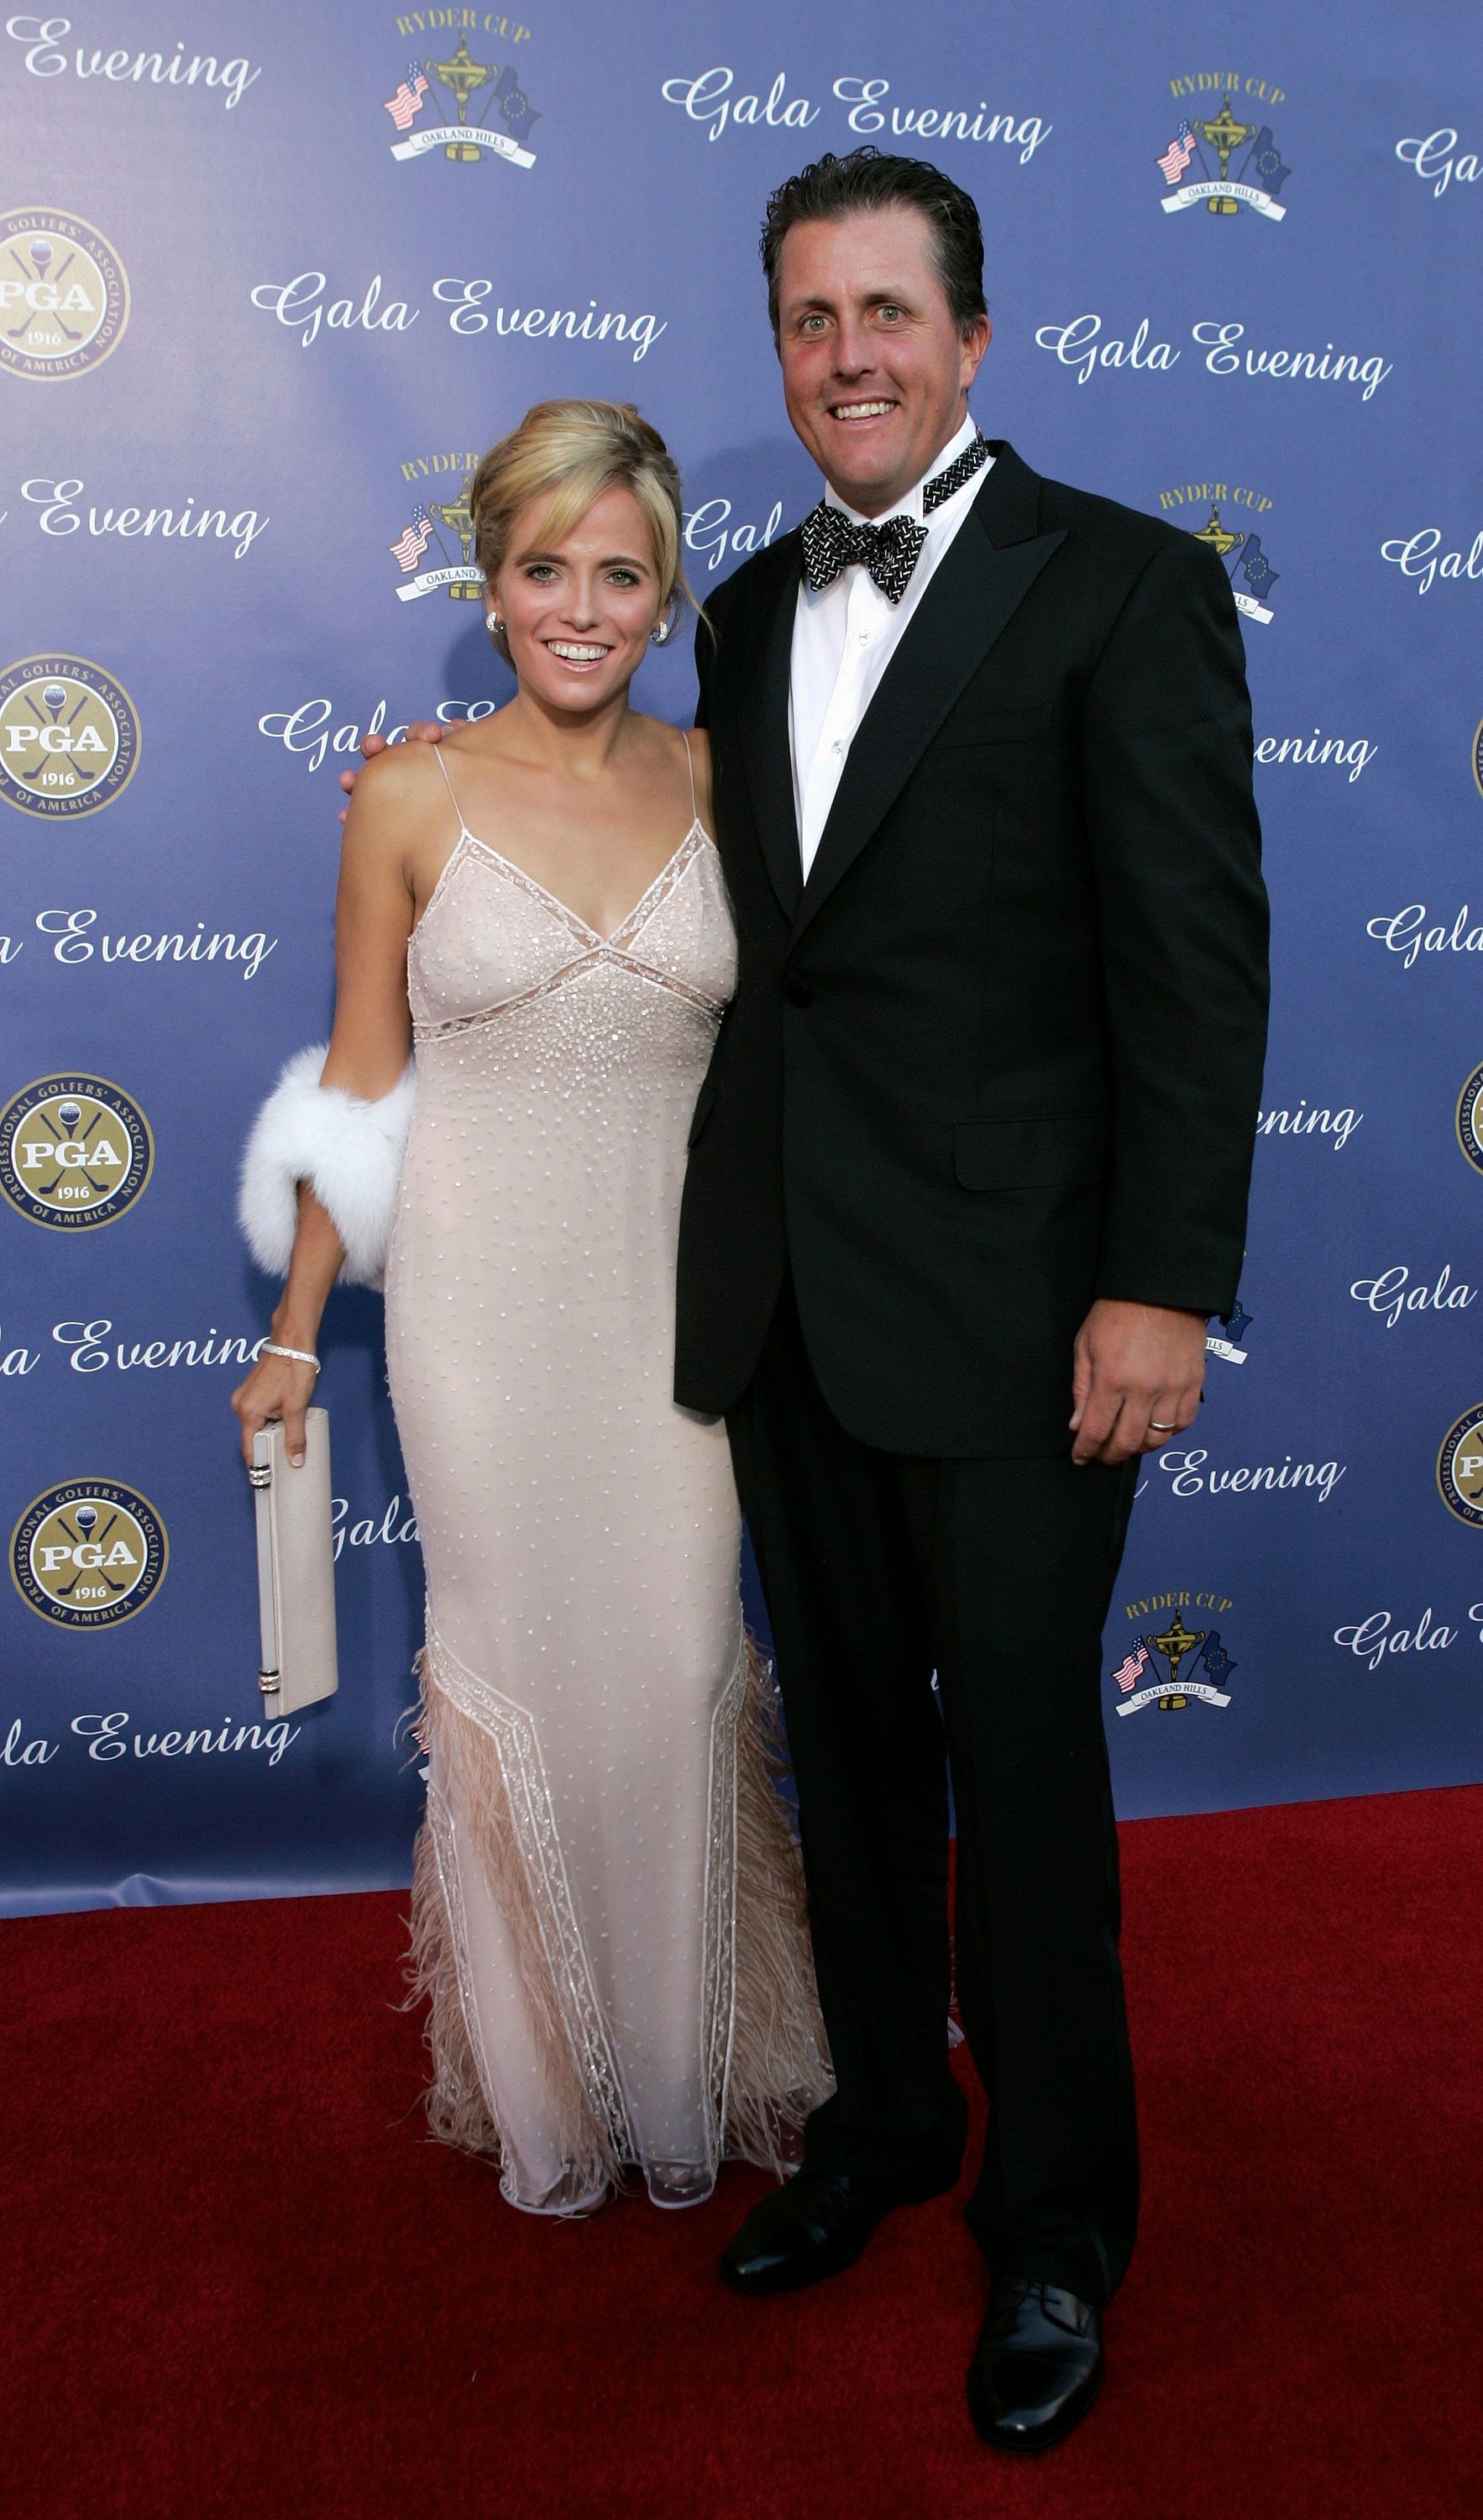 Phil Mickelson and Amy Mickelson at the 35th Ryder Cup Matches Gala Dinner on September, 15 2004, in Michigan. | Source: Getty Images